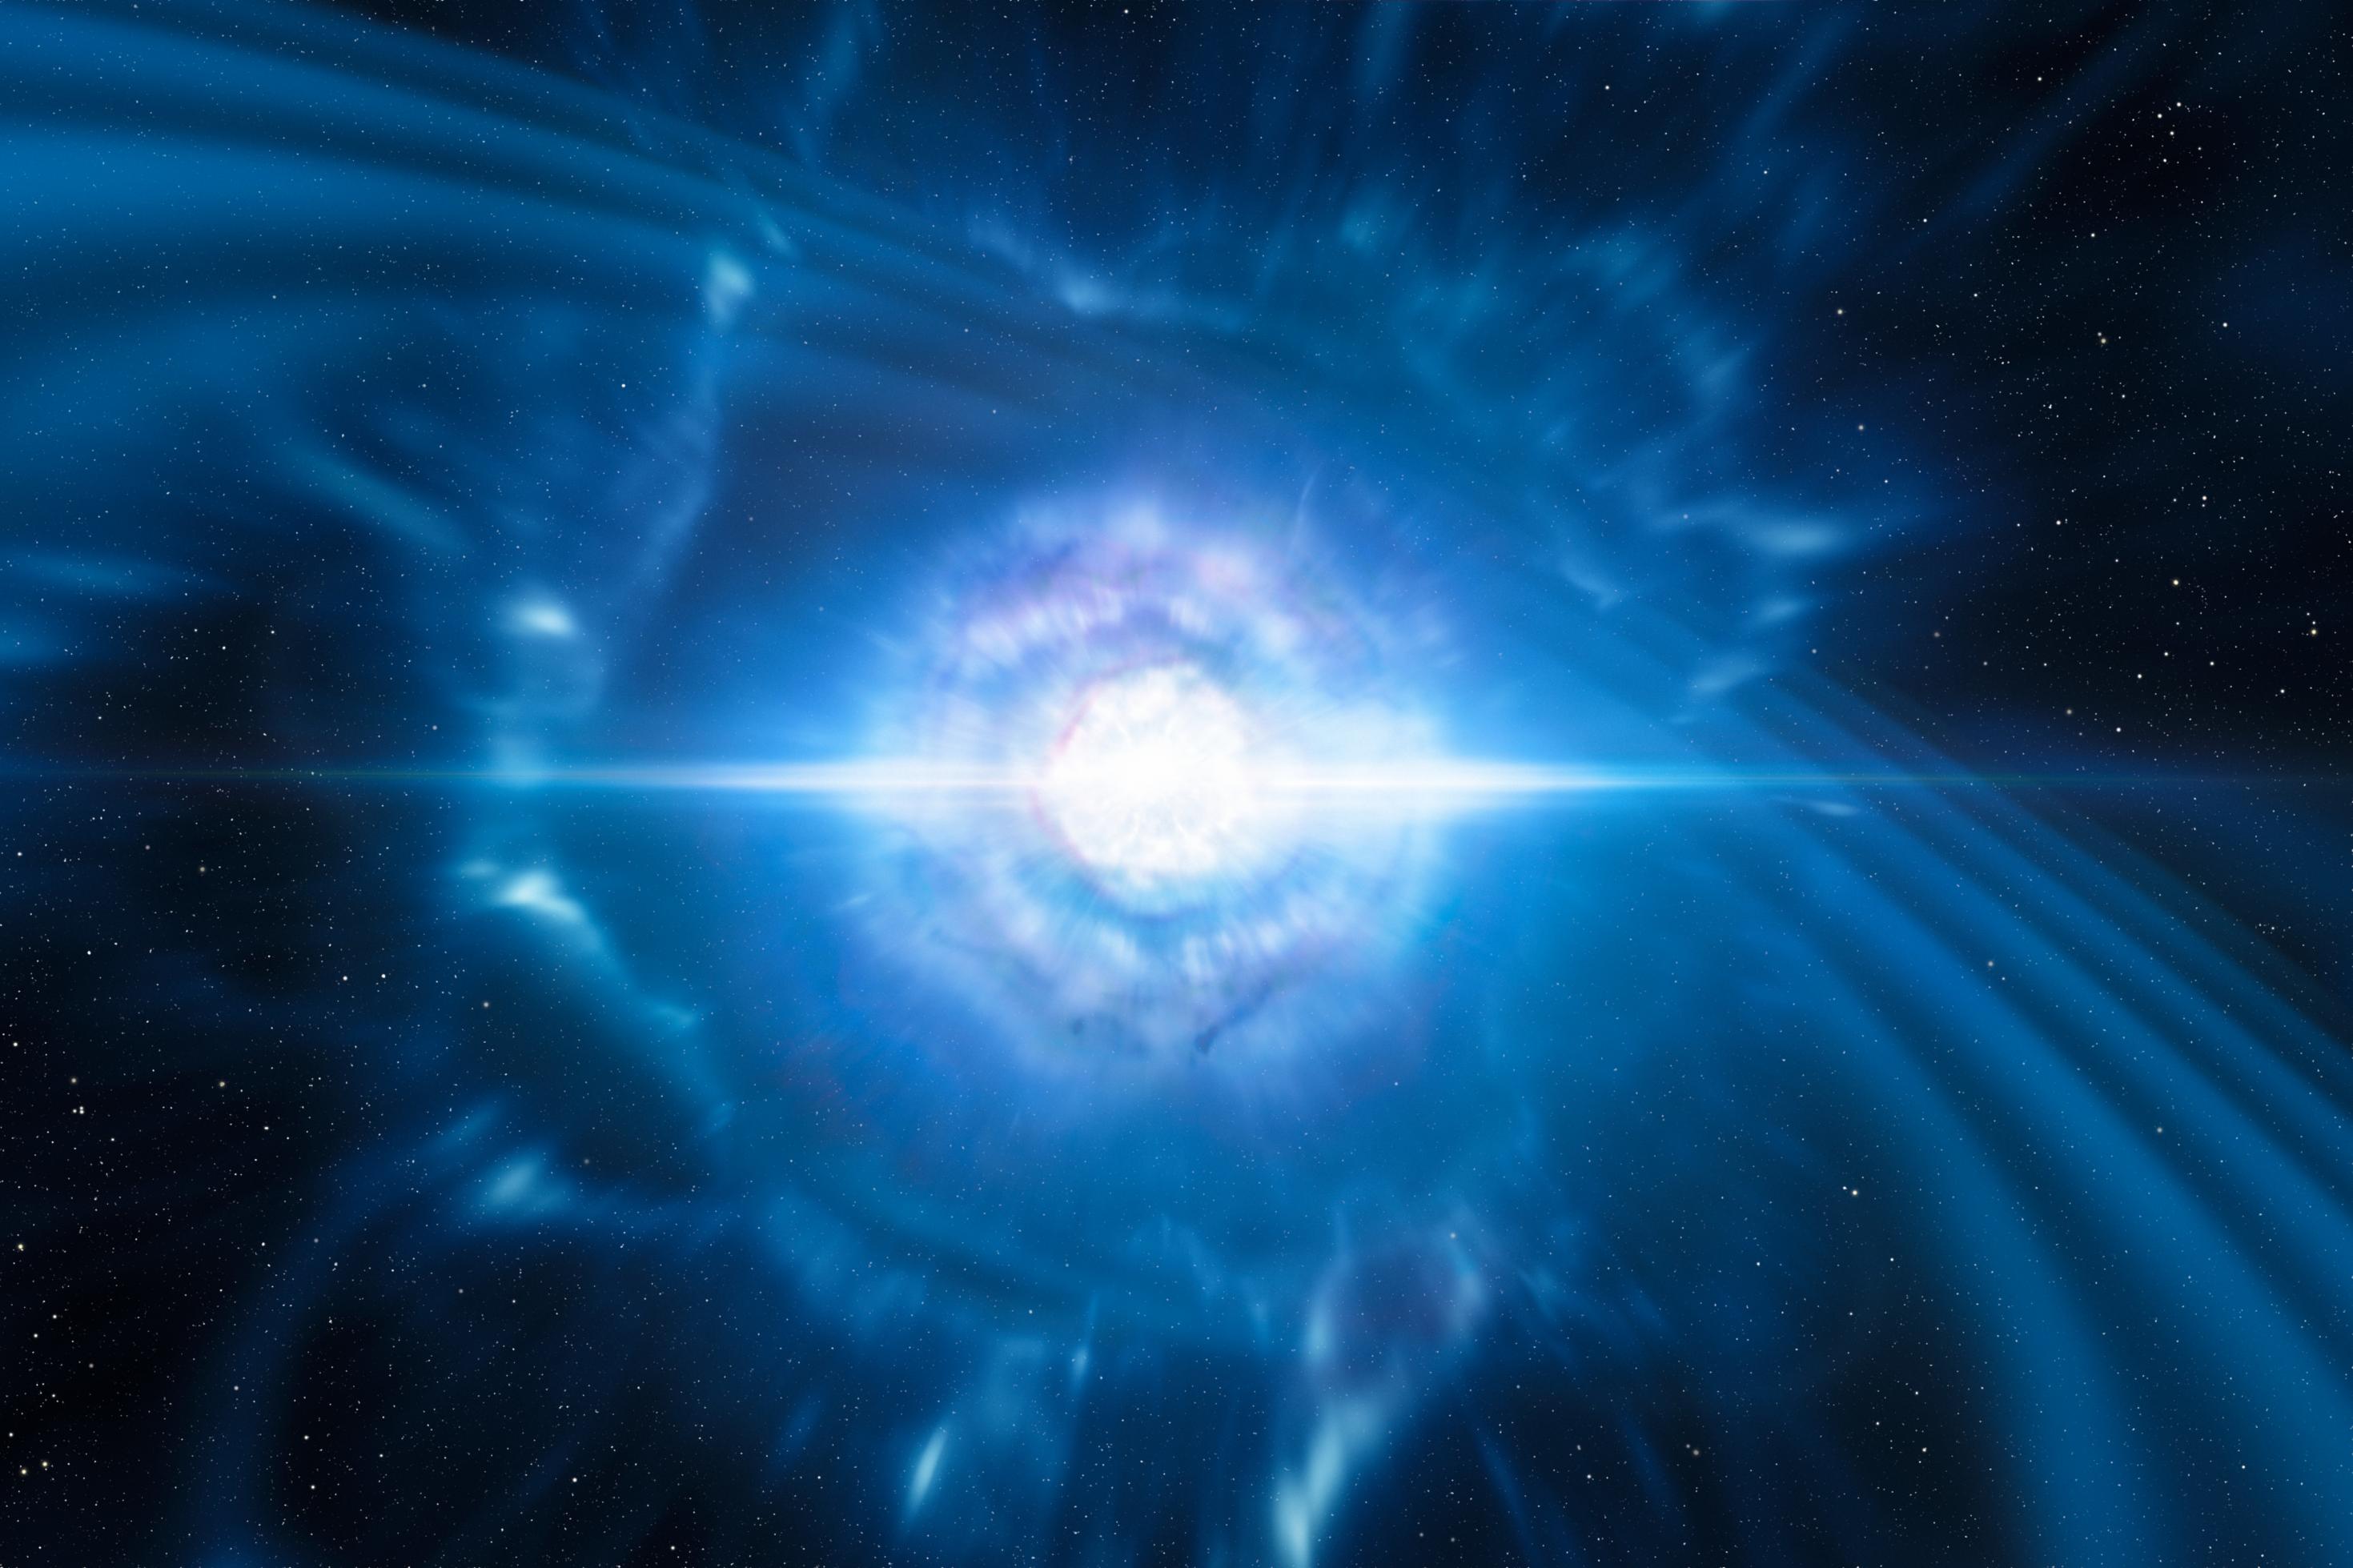 This artist?s impression shows two tiny but very dense neutron stars at the point at which they merge and explode as a kilonova. Such a very rare event is expected to produce both gravitational waves and a short gamma-ray burst, both of which were observed on 17 August 2017 by LIGO?Virgo and Fermi/INTEGRAL respectively. Subsequent detailed observations with many ESO telescopes confirmed that this object, seen in the galaxy NGC 4993 about 130 million light-years from the Earth, is indeed a kilonova. Such objects are the main source of very heavy chemical elements, such as gold and platinum, in the Universe.